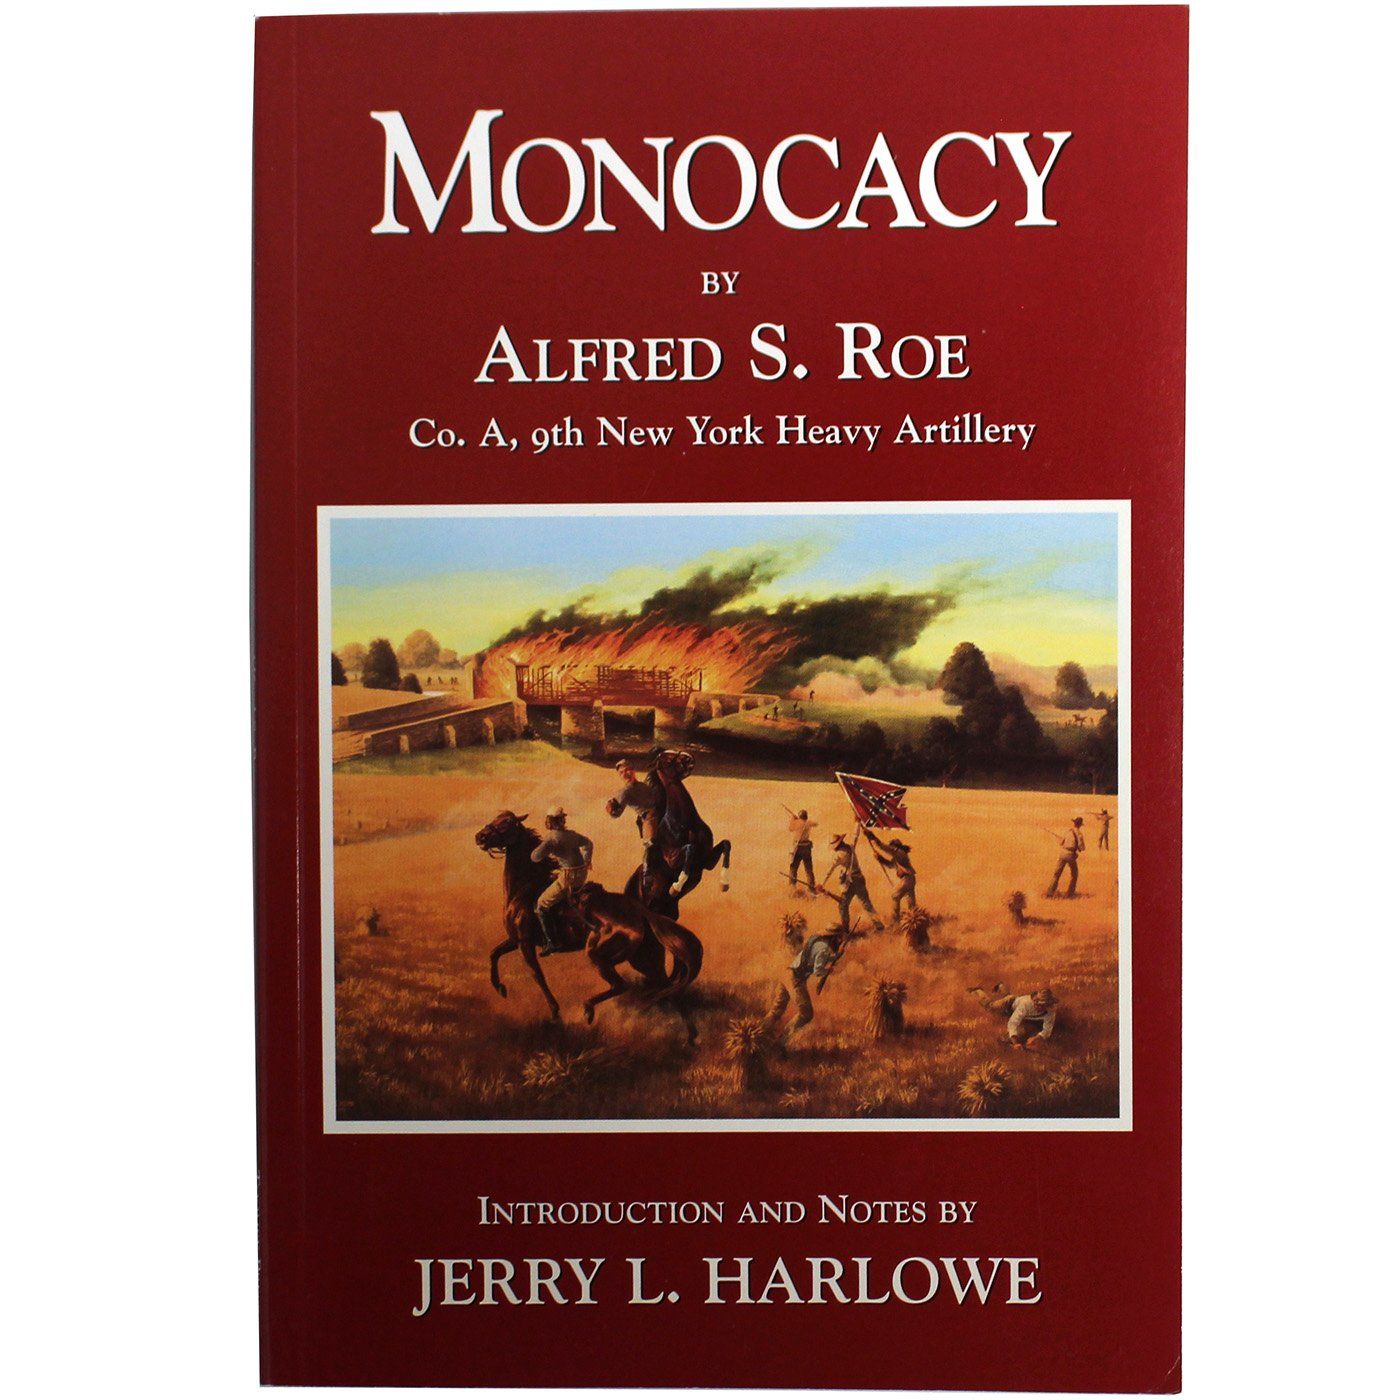 Monocacy A Sketch of the Battle of Monocacy, MD Alfred S. Roe, Co A, 9th N.Y. Heavy Artillery / Book - Route One Apparel